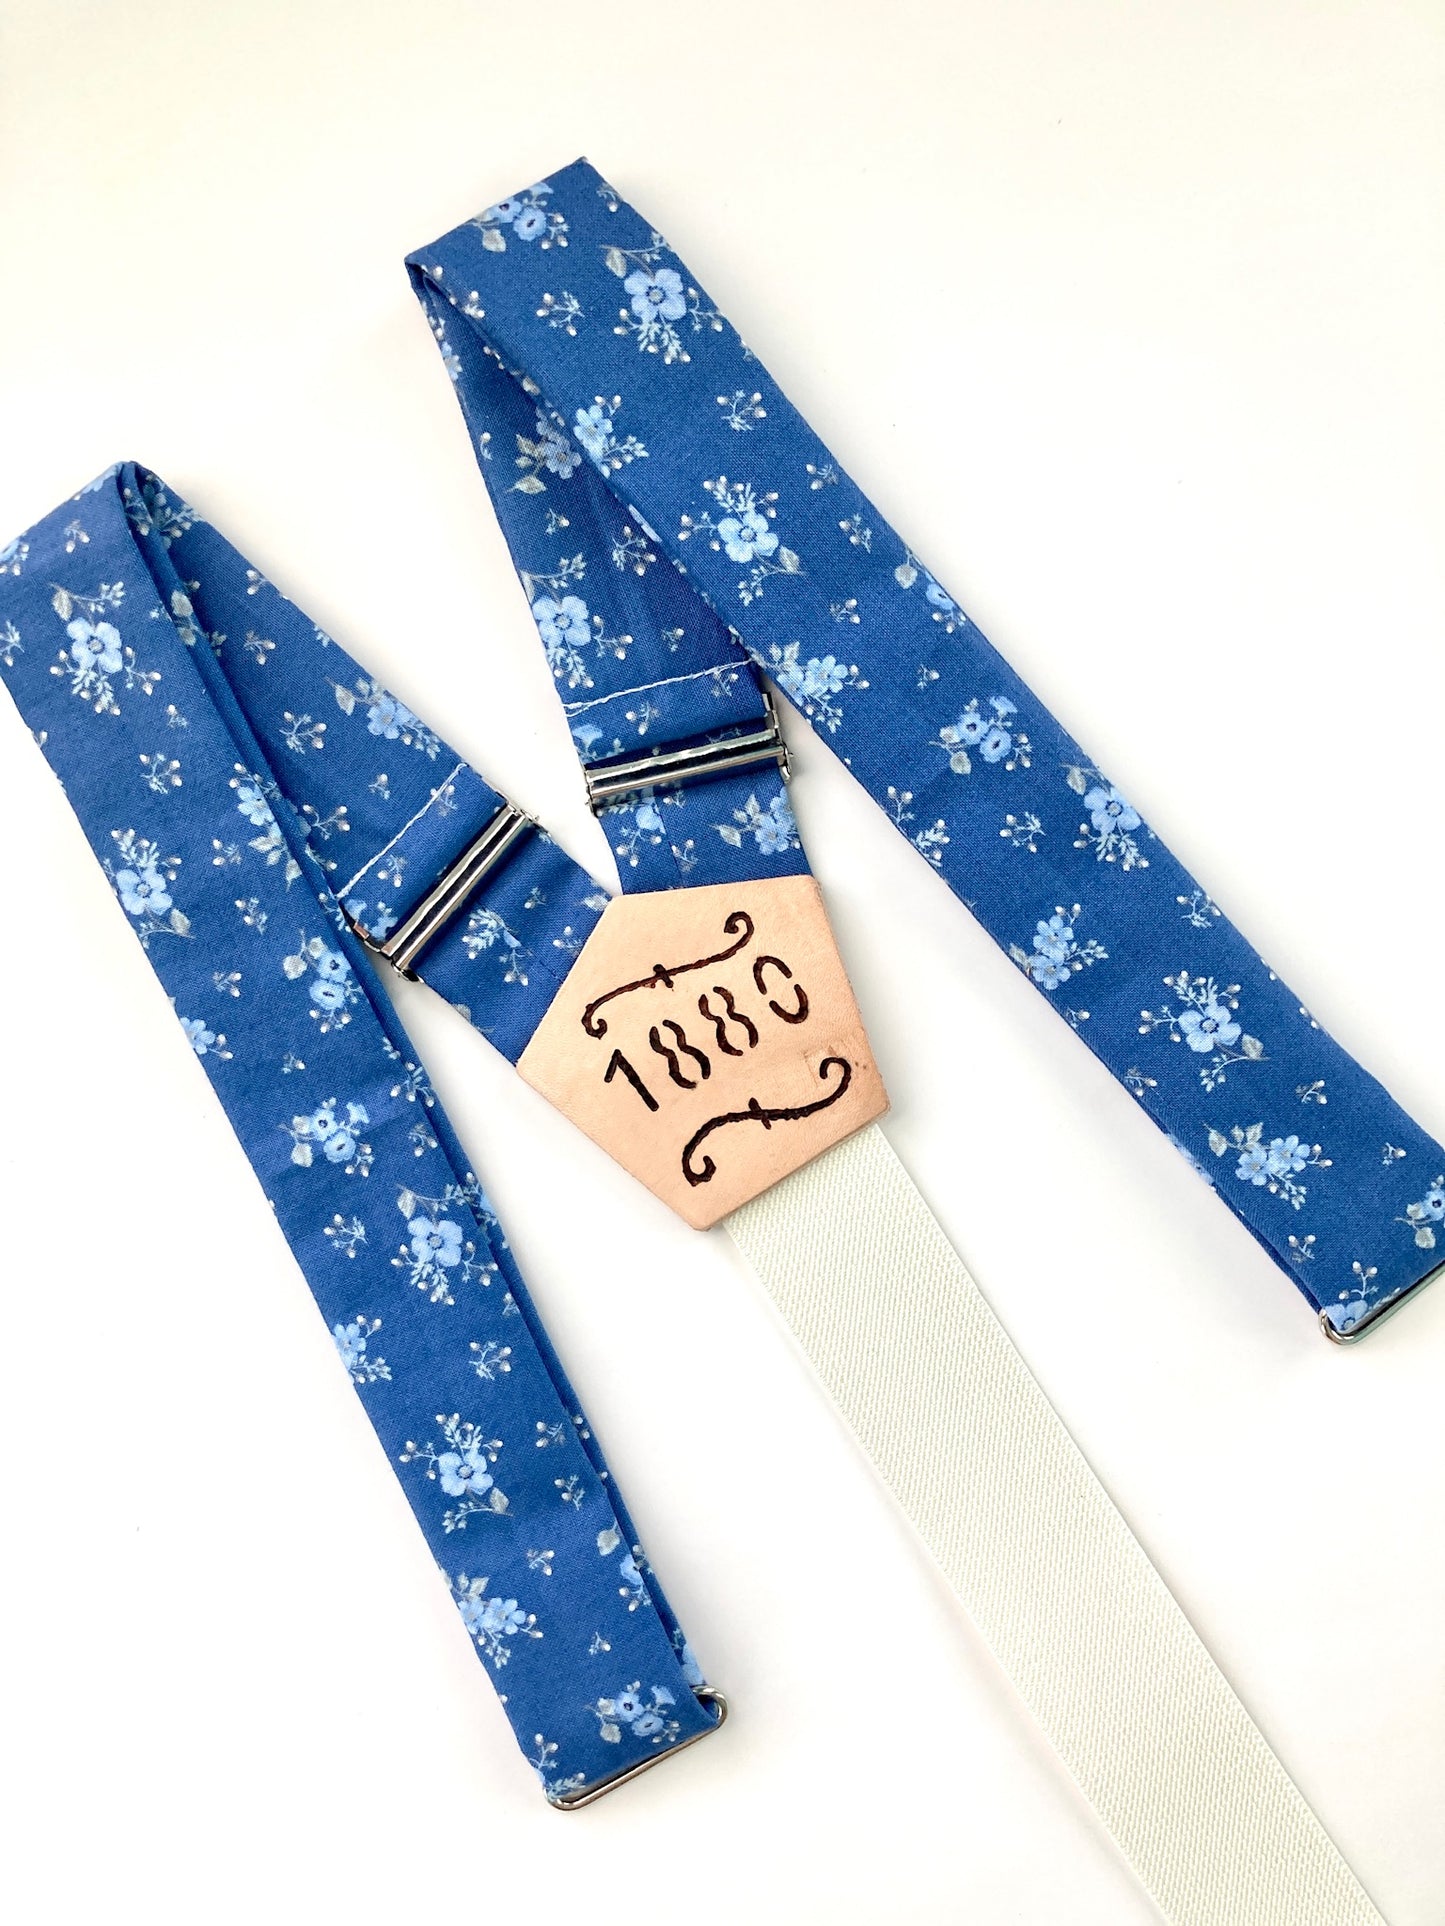 Stratton Suspenders Blue Floral Straps of the Limited Edition 1880 Vintage Collection